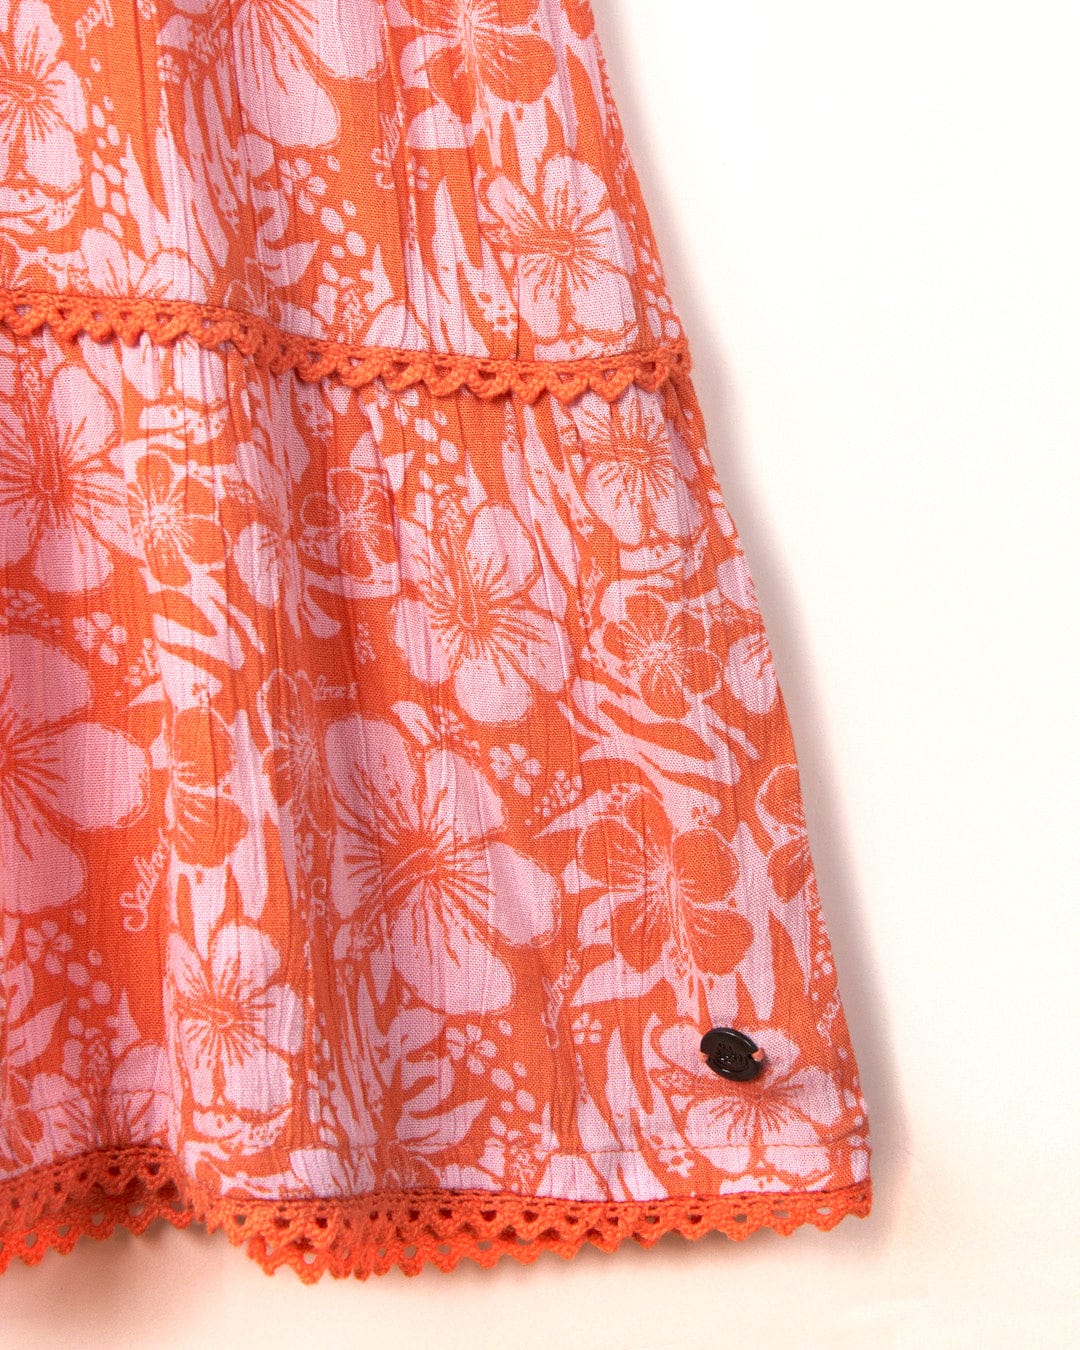 Saltrock's Marla Hibiscus Womens Dress in orange, with a coral-colored lace design and a small black button on a light background.